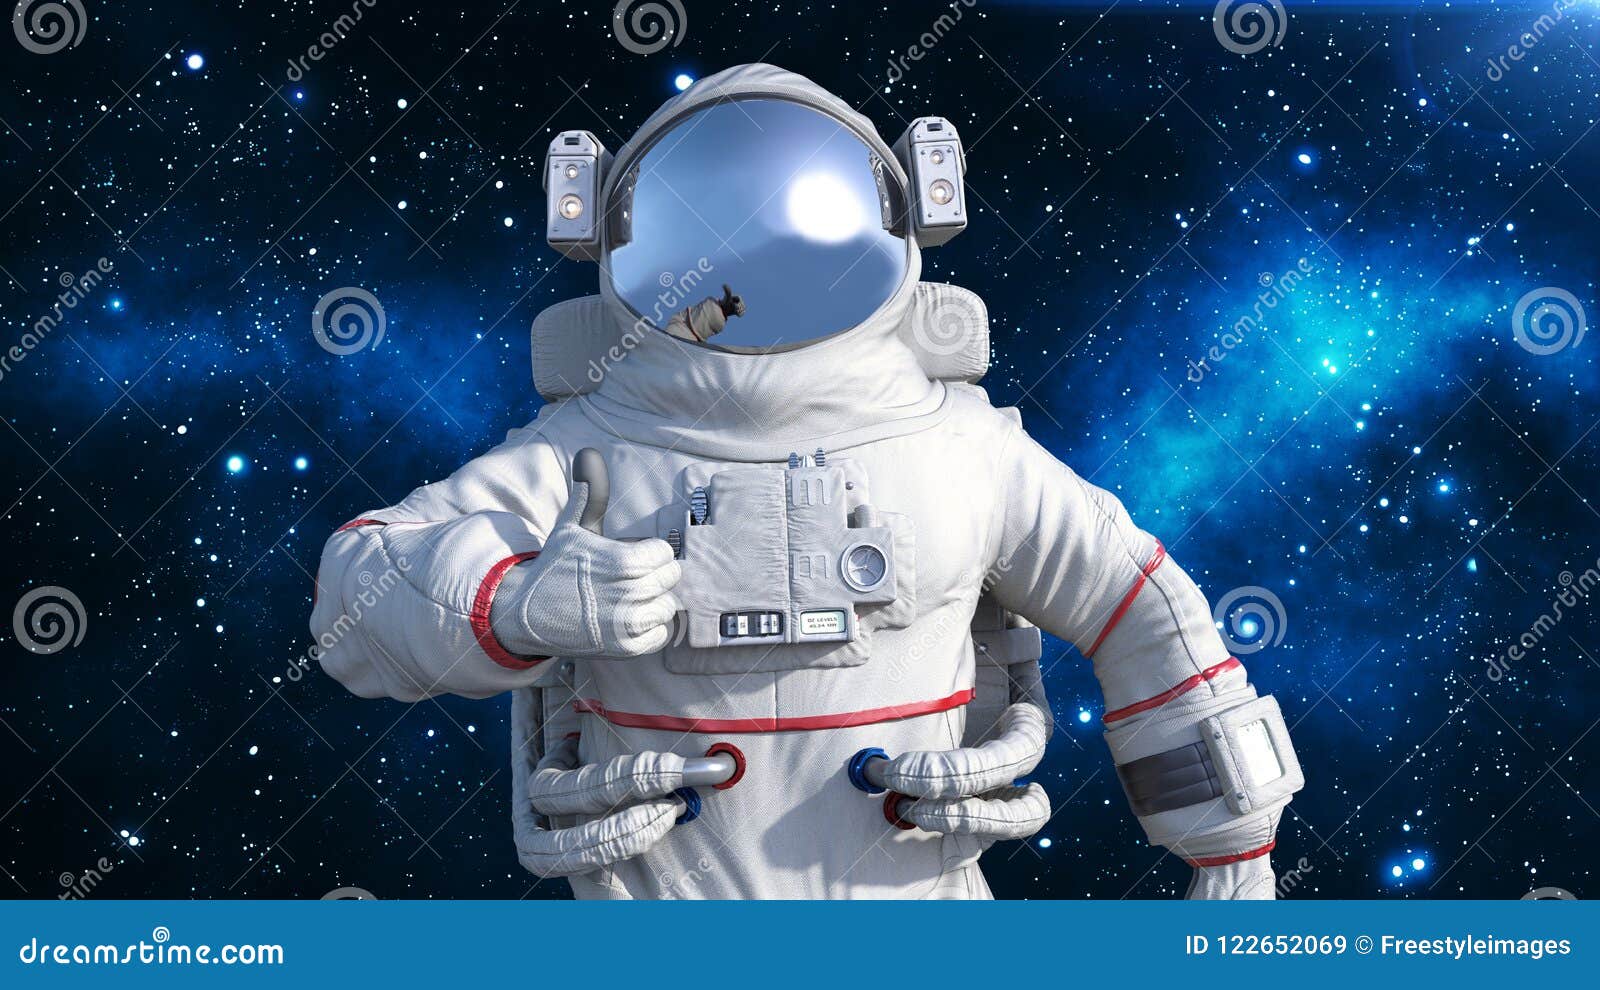 astronaut in spacesuit showing thumbs up, cosmonaut floating in space, close up view, 3d render